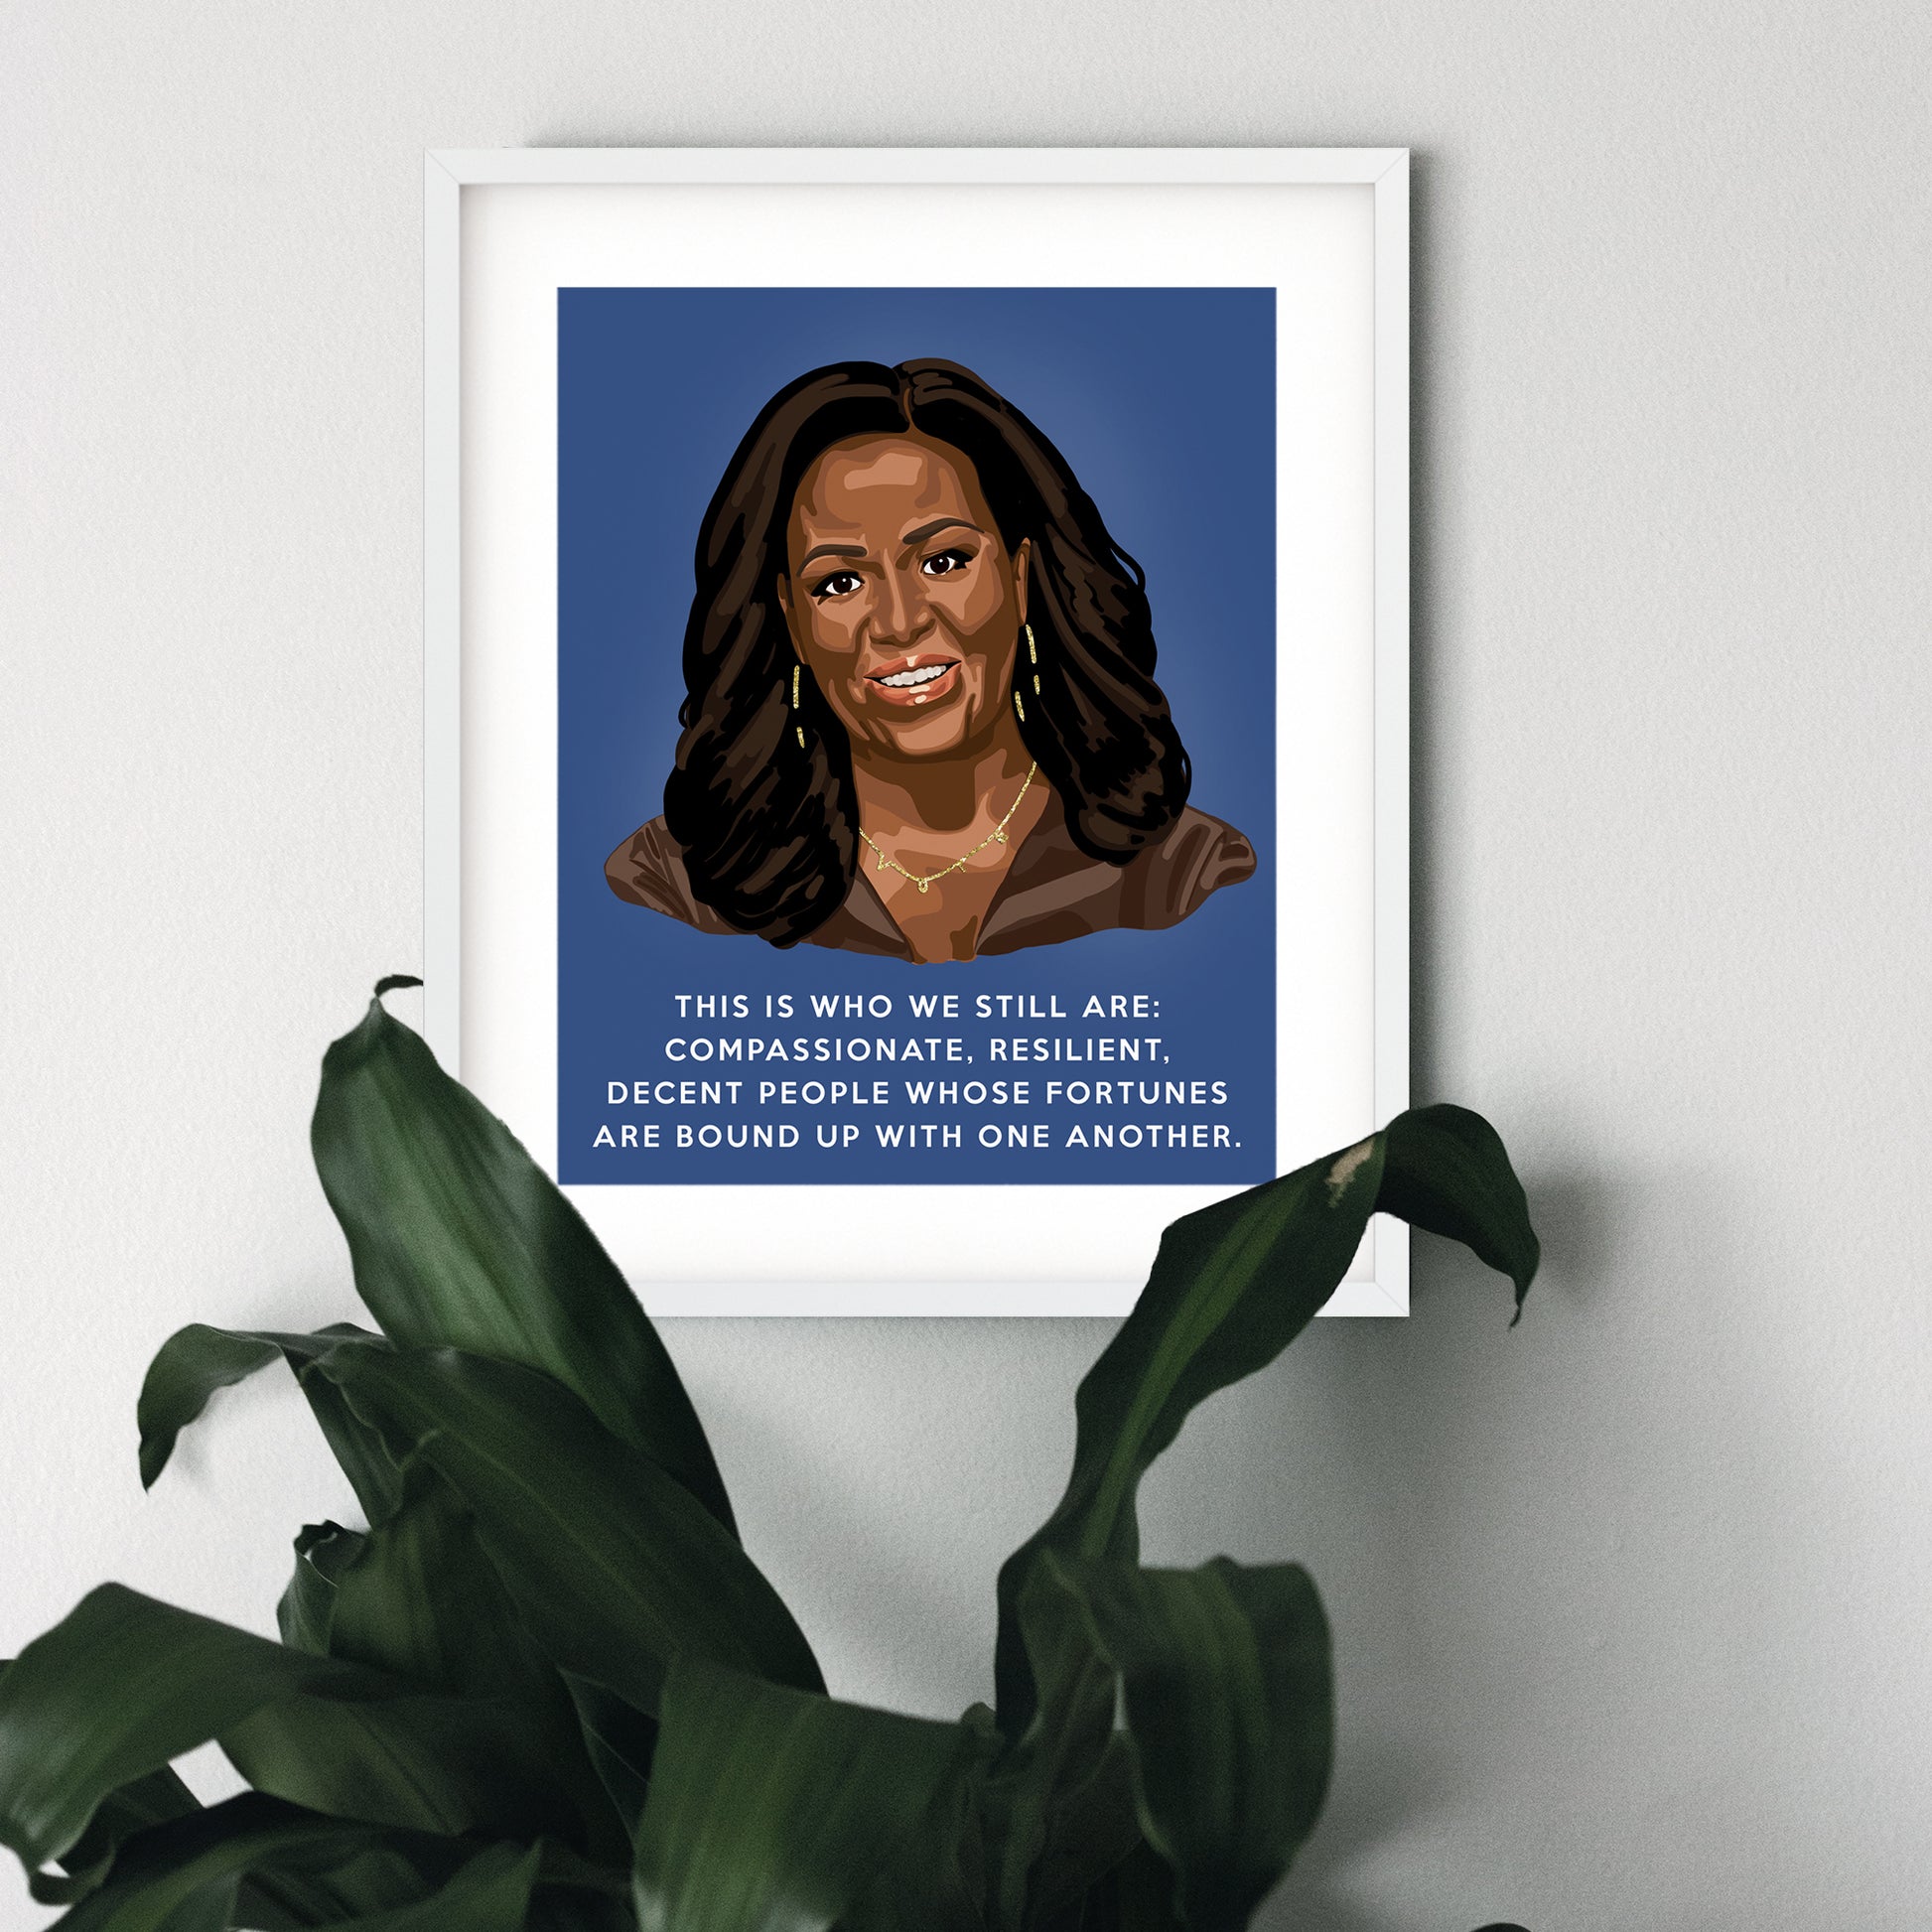 Michelle Obama portrait feat. 'This Is Who We Are' quote, white frame with mat - Candid Almond